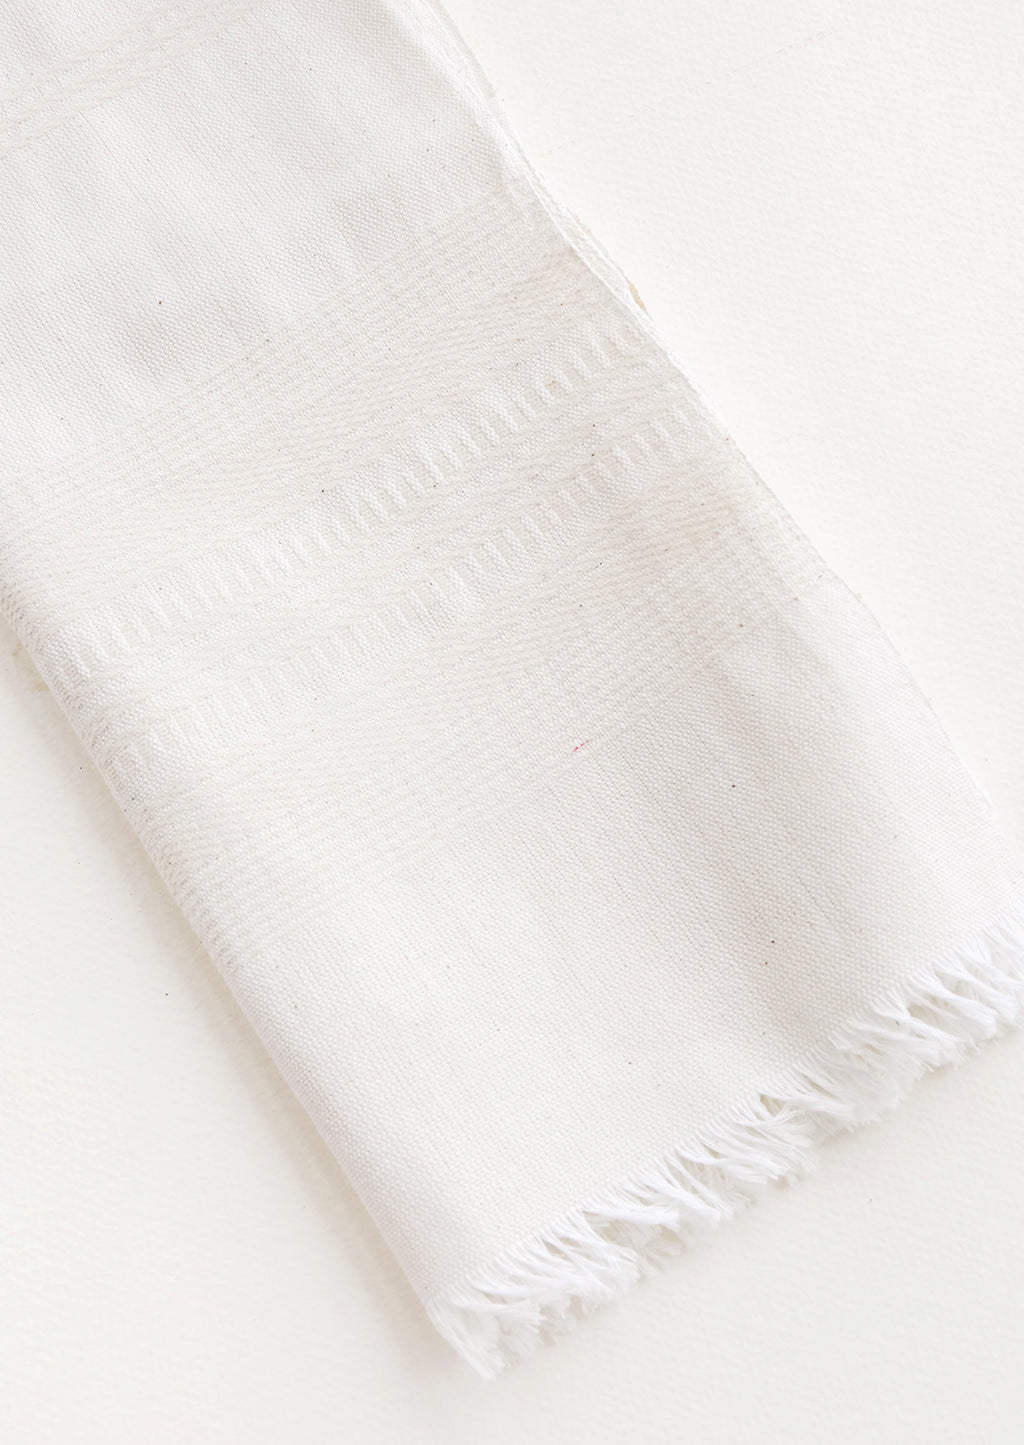 Unbleached: A white cotton towel with fringed edge.